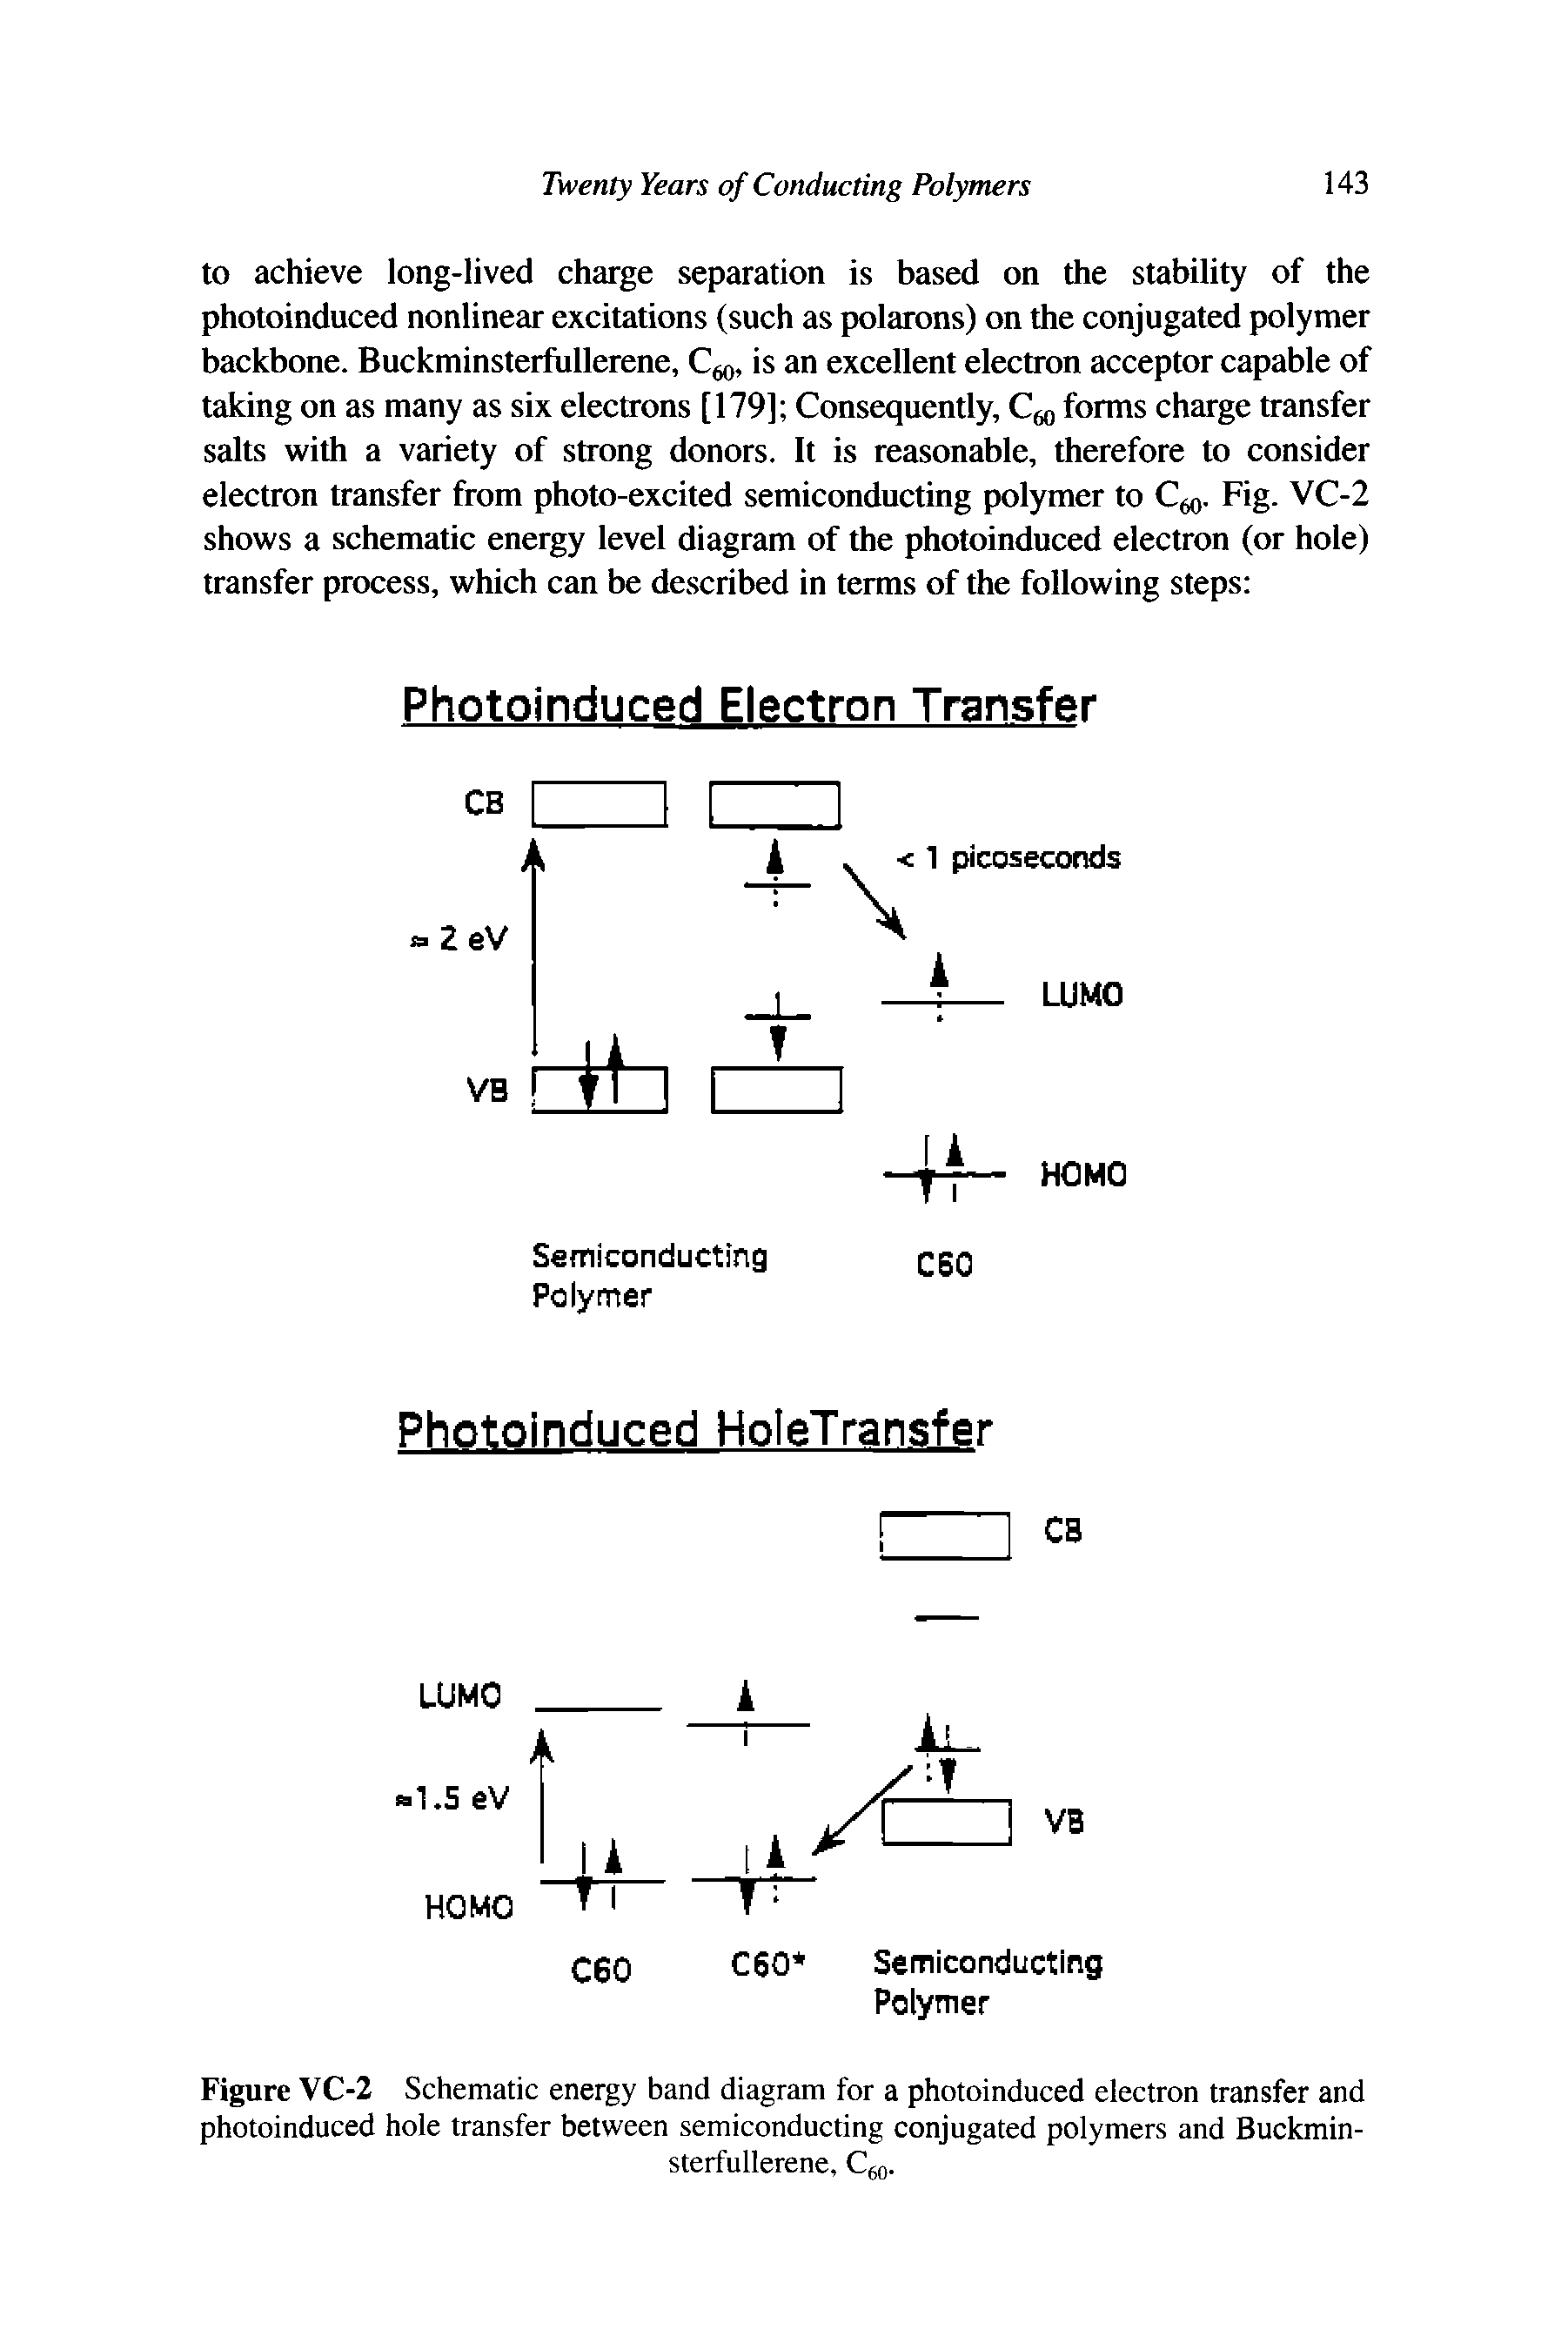 Figure VC-2 Schematic energy band diagram for a photoinduced electron transfer and photoinduced hole transfer between semiconducting conjugated polymers and Buckminsterfullerene, Cfo-...